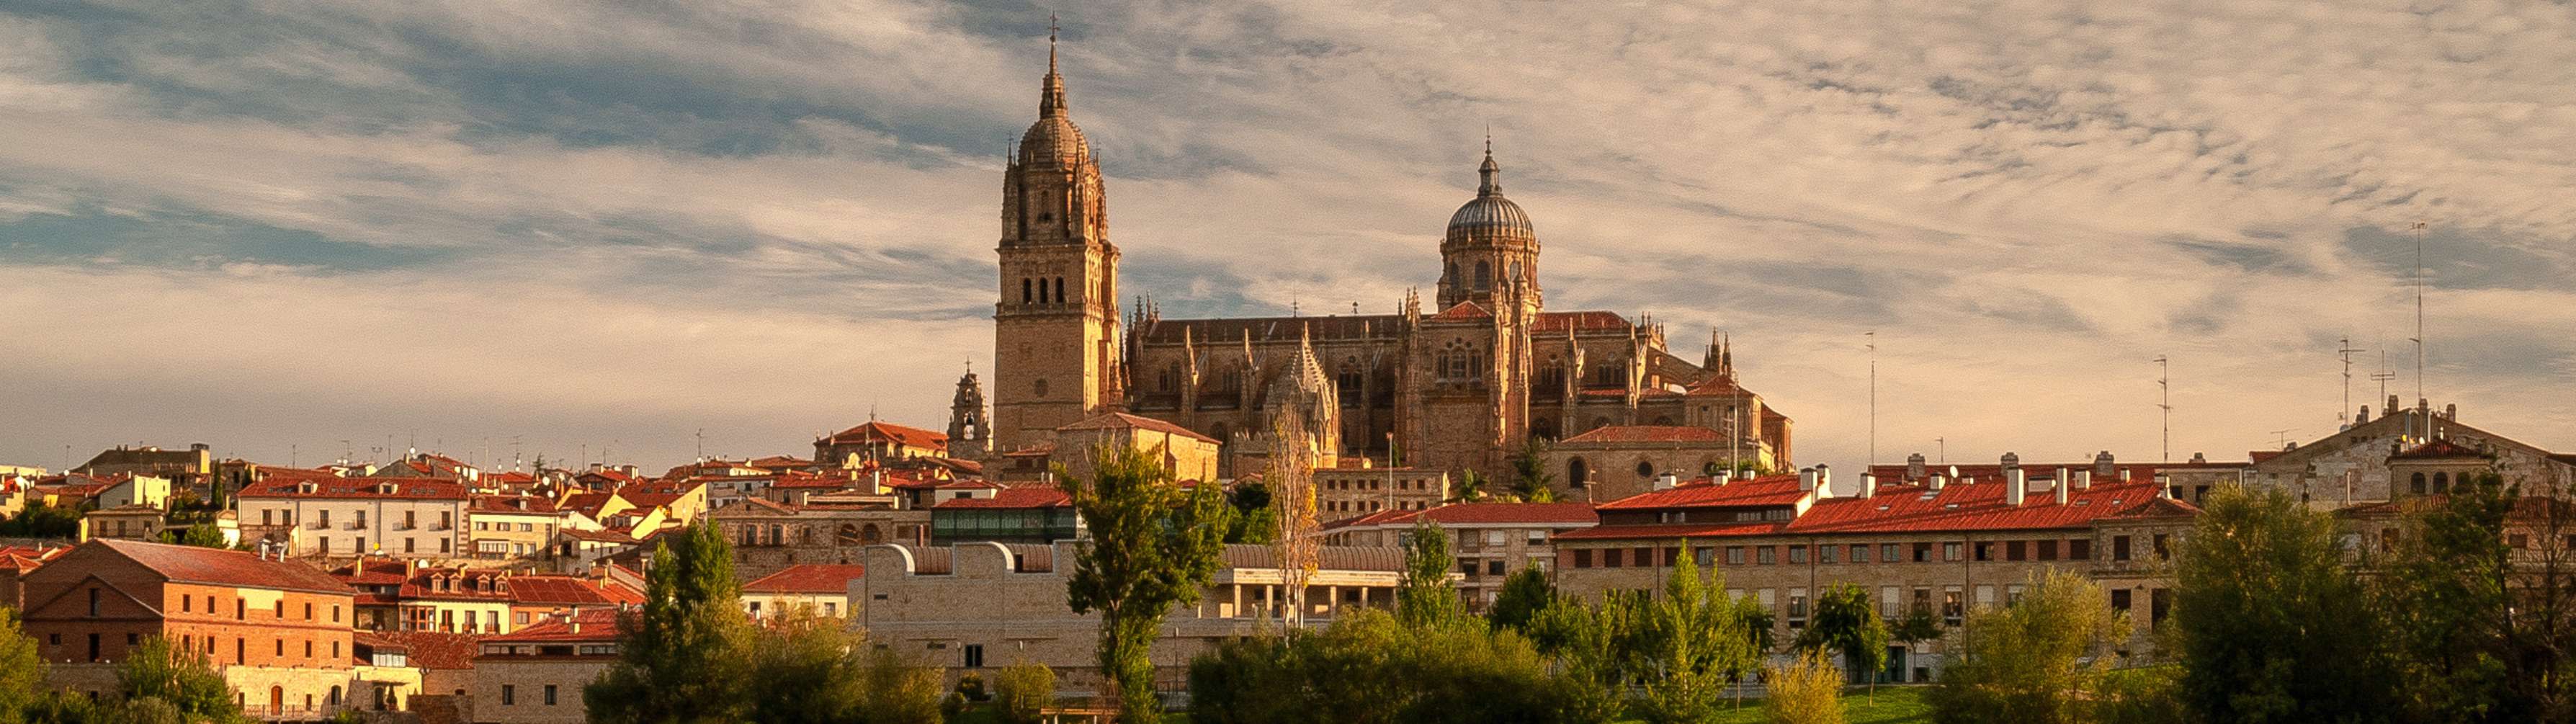 A beautiful cathedral in the town of Salamanca during evening or dusk.